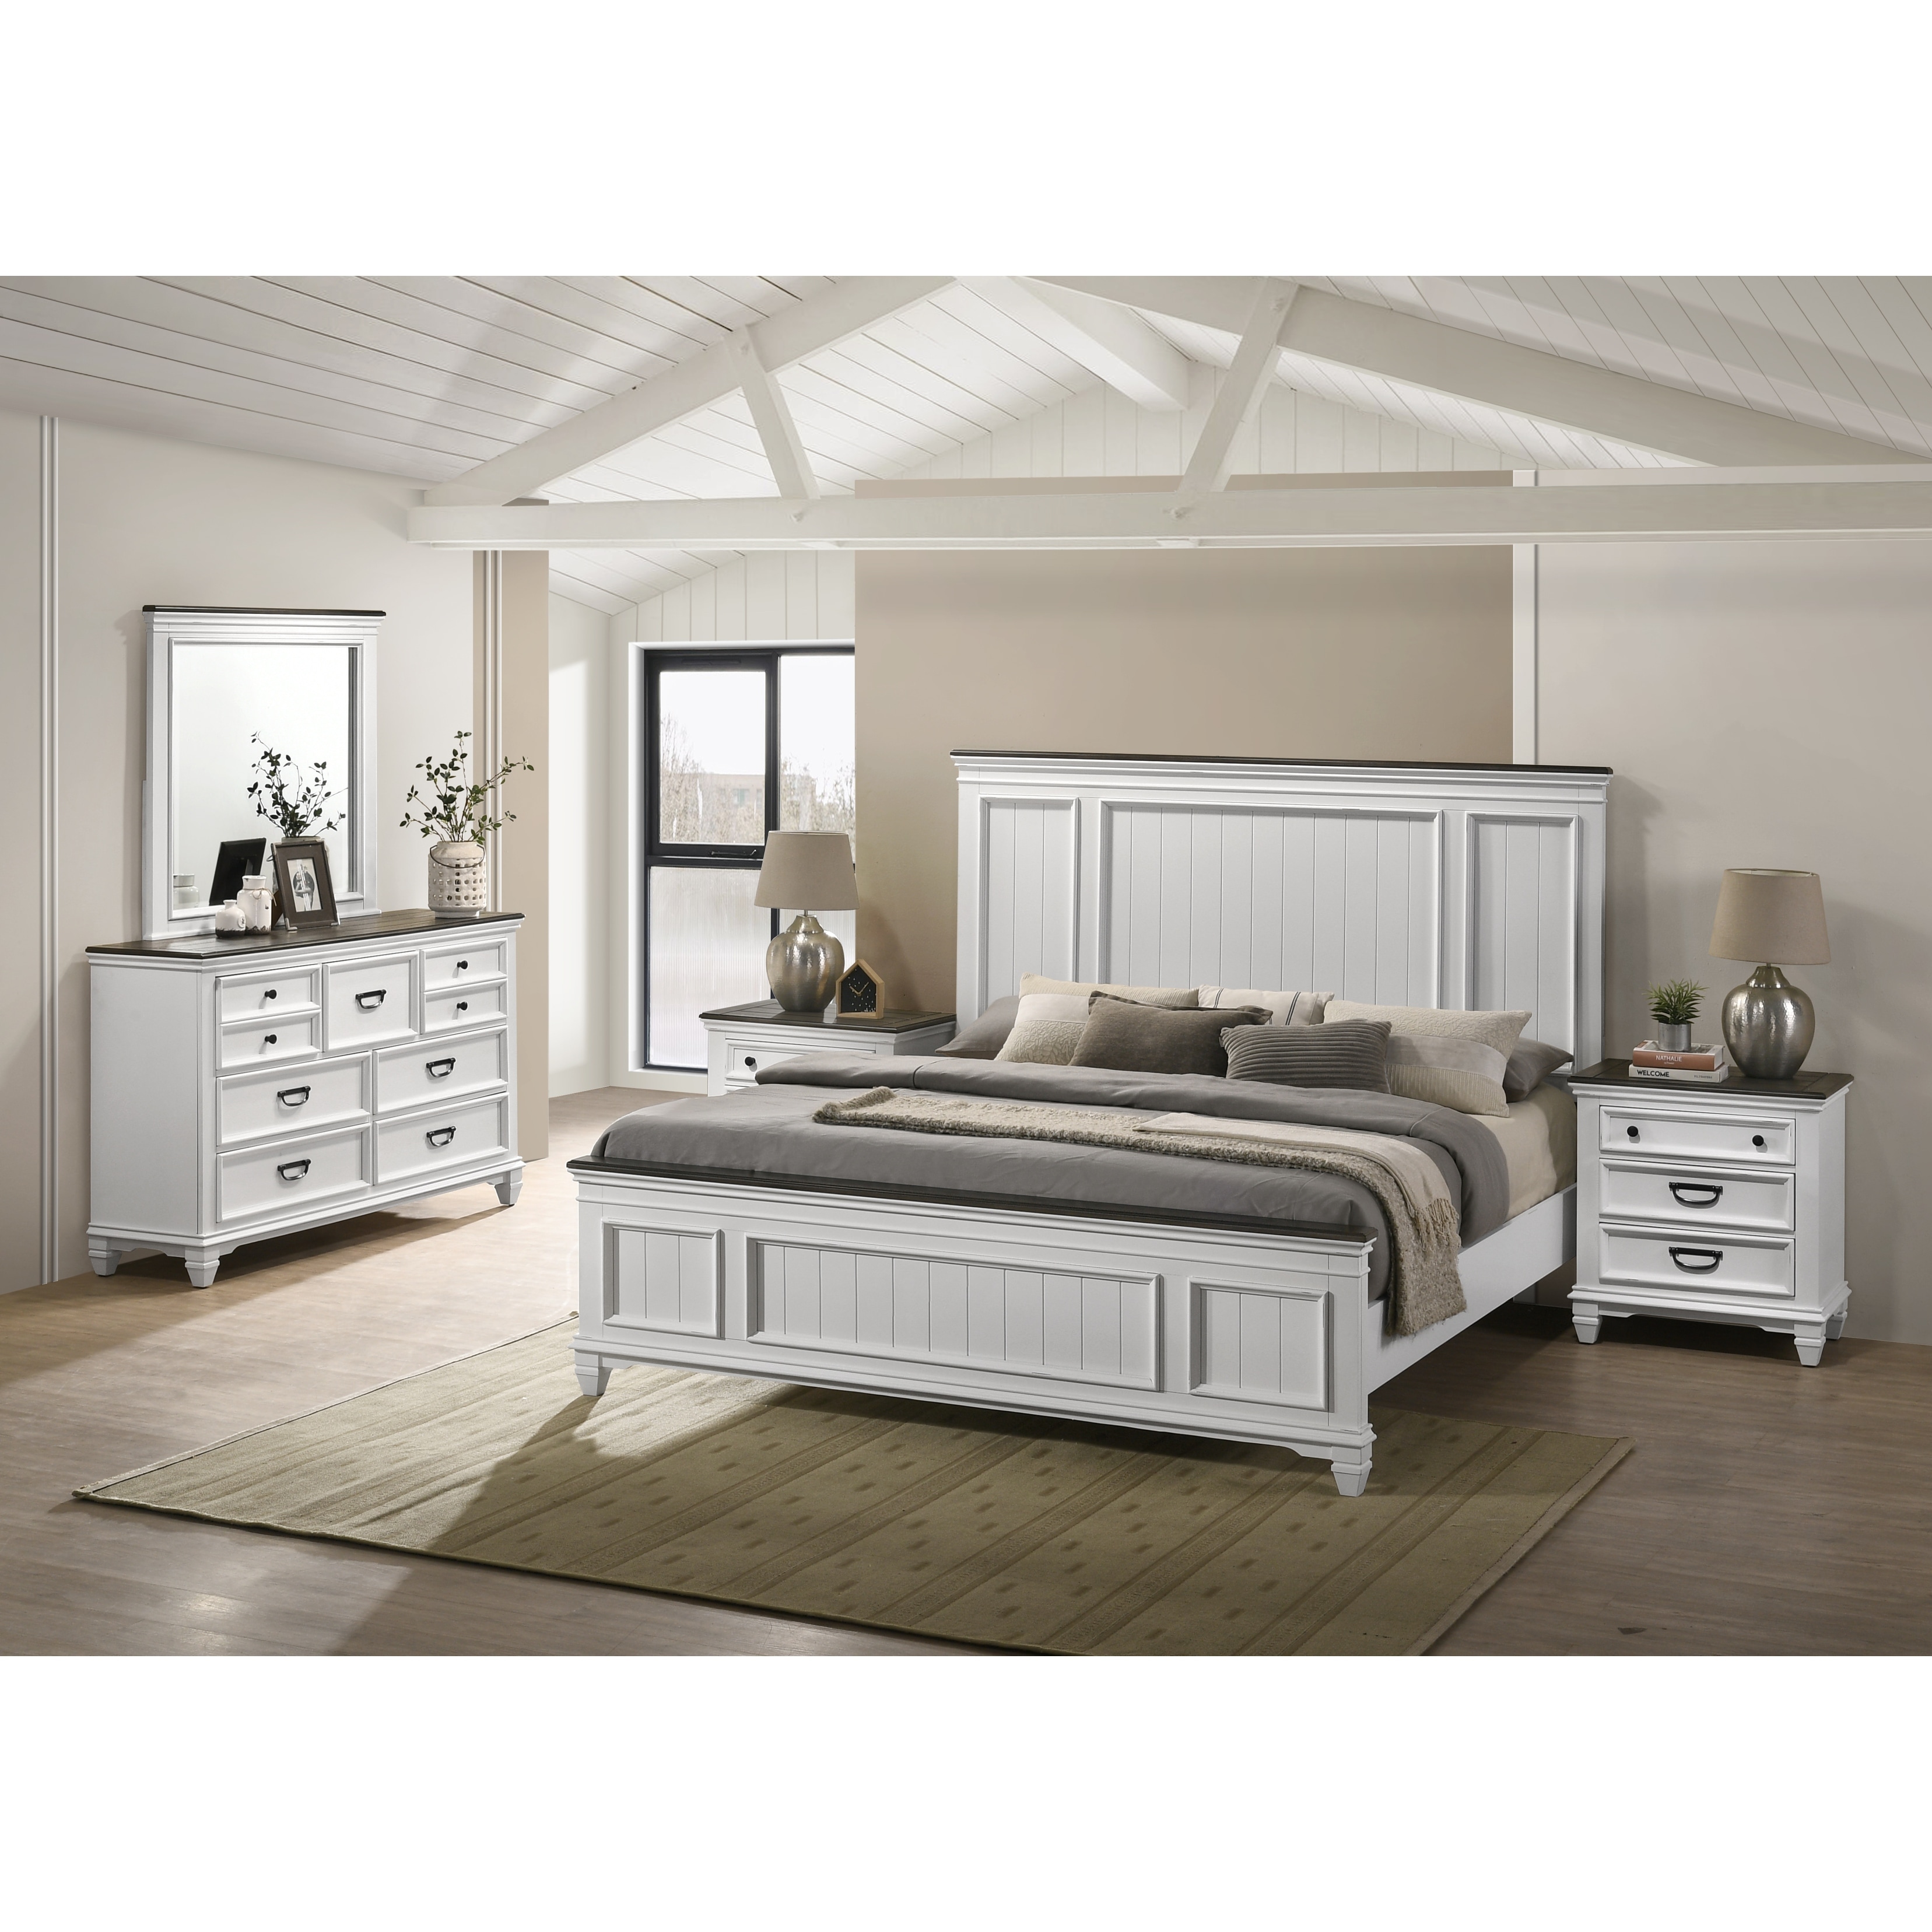 https://ak1.ostkcdn.com/images/products/is/images/direct/a561f58dd80eb35337effb19643d053e8083bff8/Clelane-Wood-Bedroom-Set-with-Shiplap-Panel-Bed%2C-Dresser%2C-Mirror%2C-and-Two-Nightstands-in-Weathered-White-and-Walnut.jpg